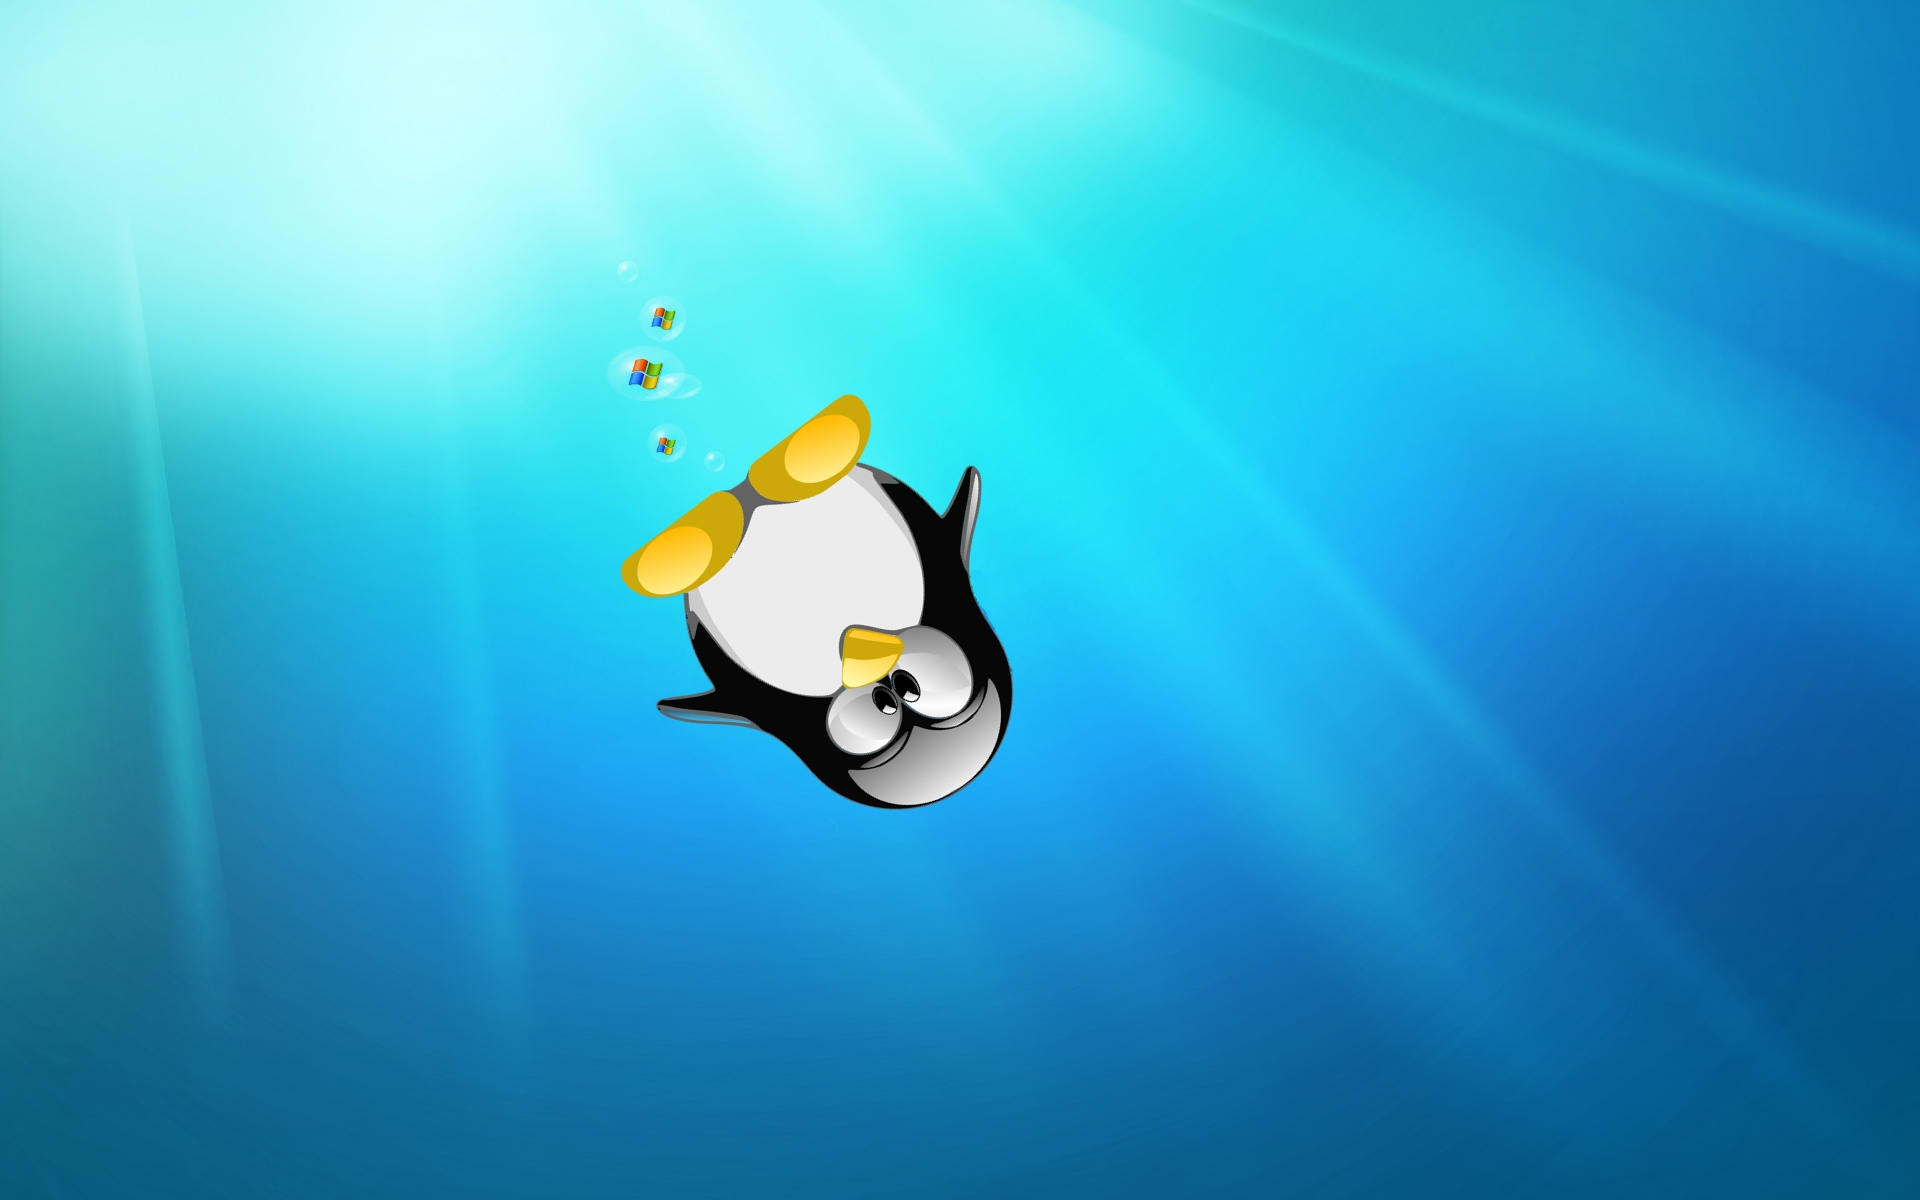 To watch the Top 10 Awesome Windows 7 Linux Wallpapers click here 1920x1200